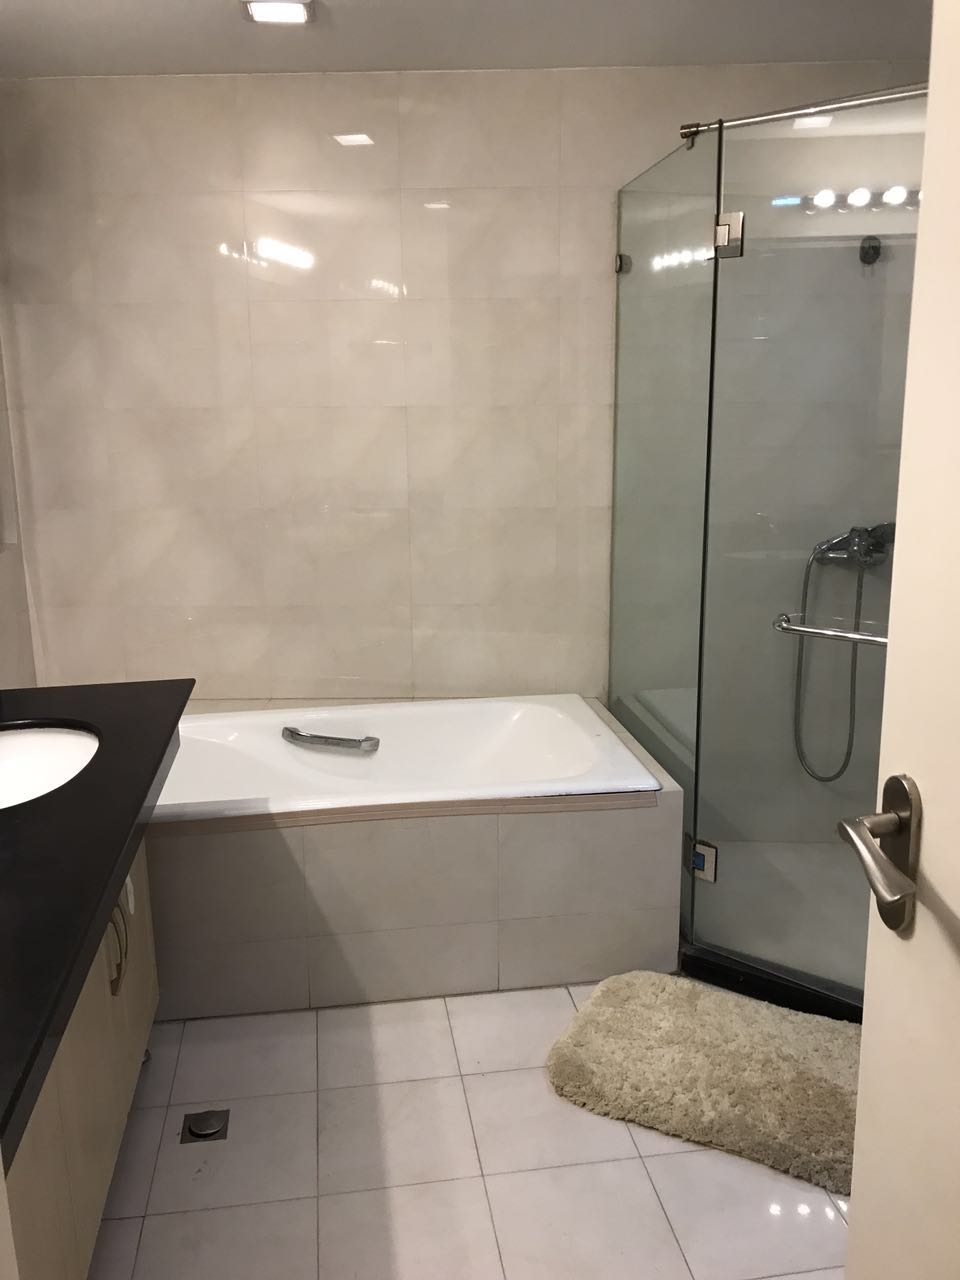 looking for apartment shanghai Spacious and well maintained (176sqm) 3bedroom apartment near Nanjing W Rd in Ladoll for rent